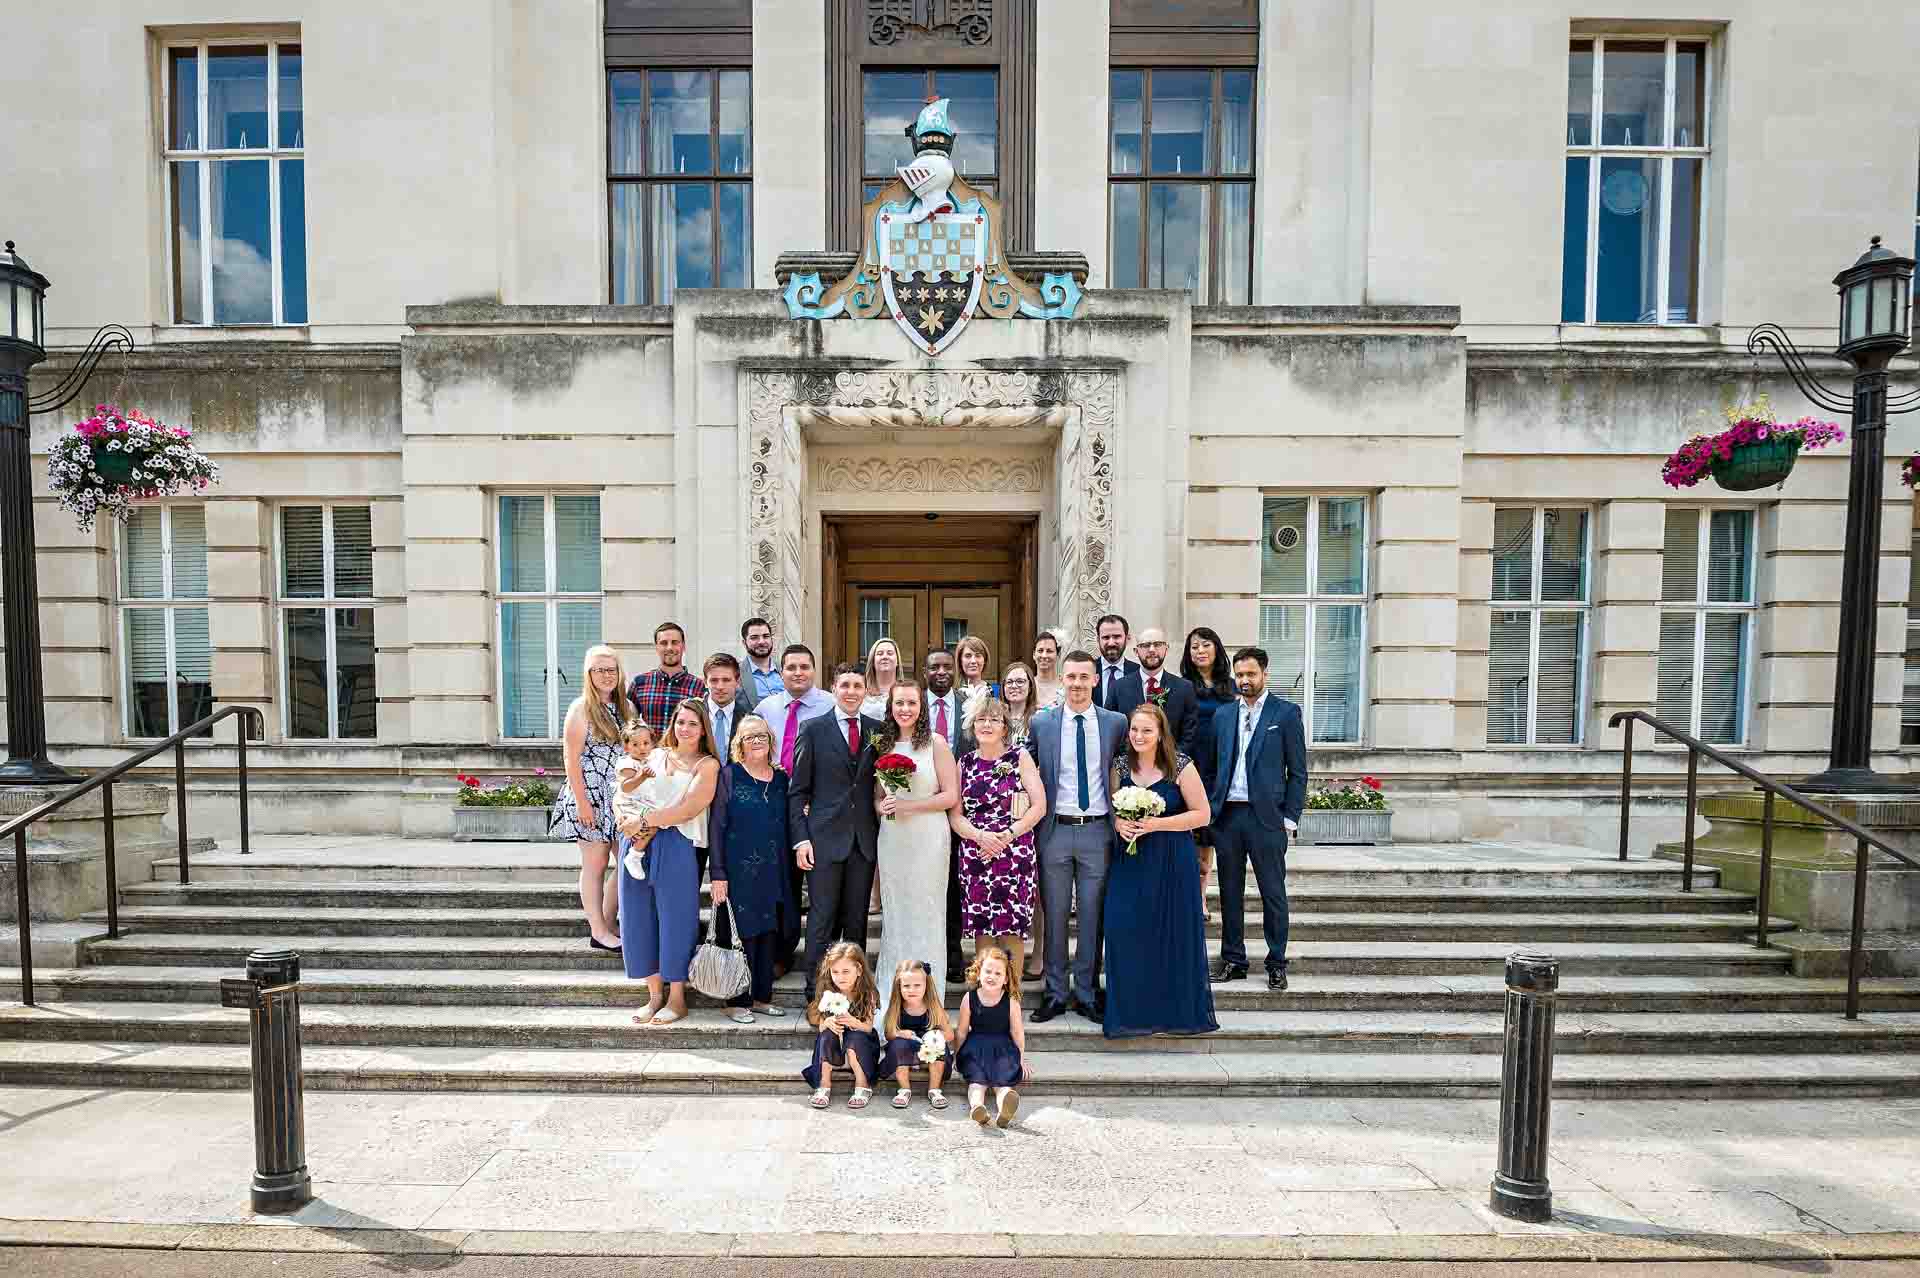 Group photo of the whole wedding party at Wandsworth Town Hall